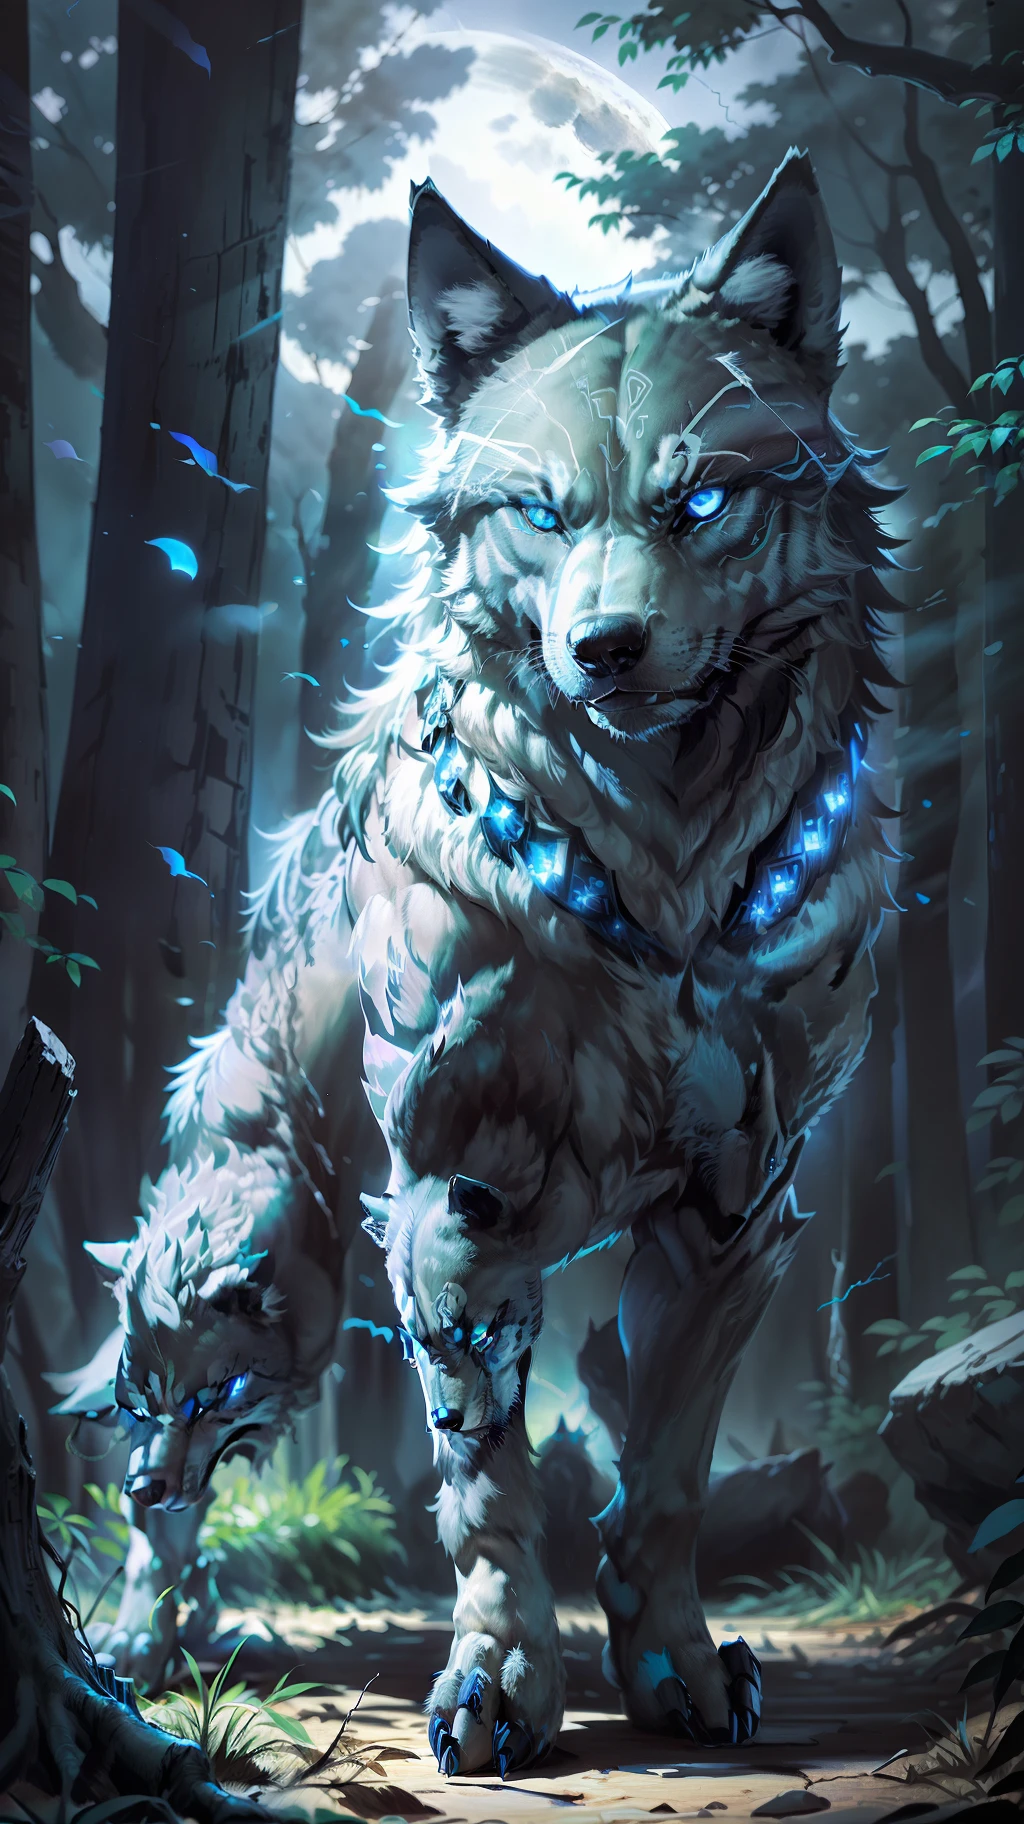 (Photorealistic open image) Super wolf protector of the pack, "black colored wolf bright blue eyes." Canine pack of wolves, (full moon, night forest)